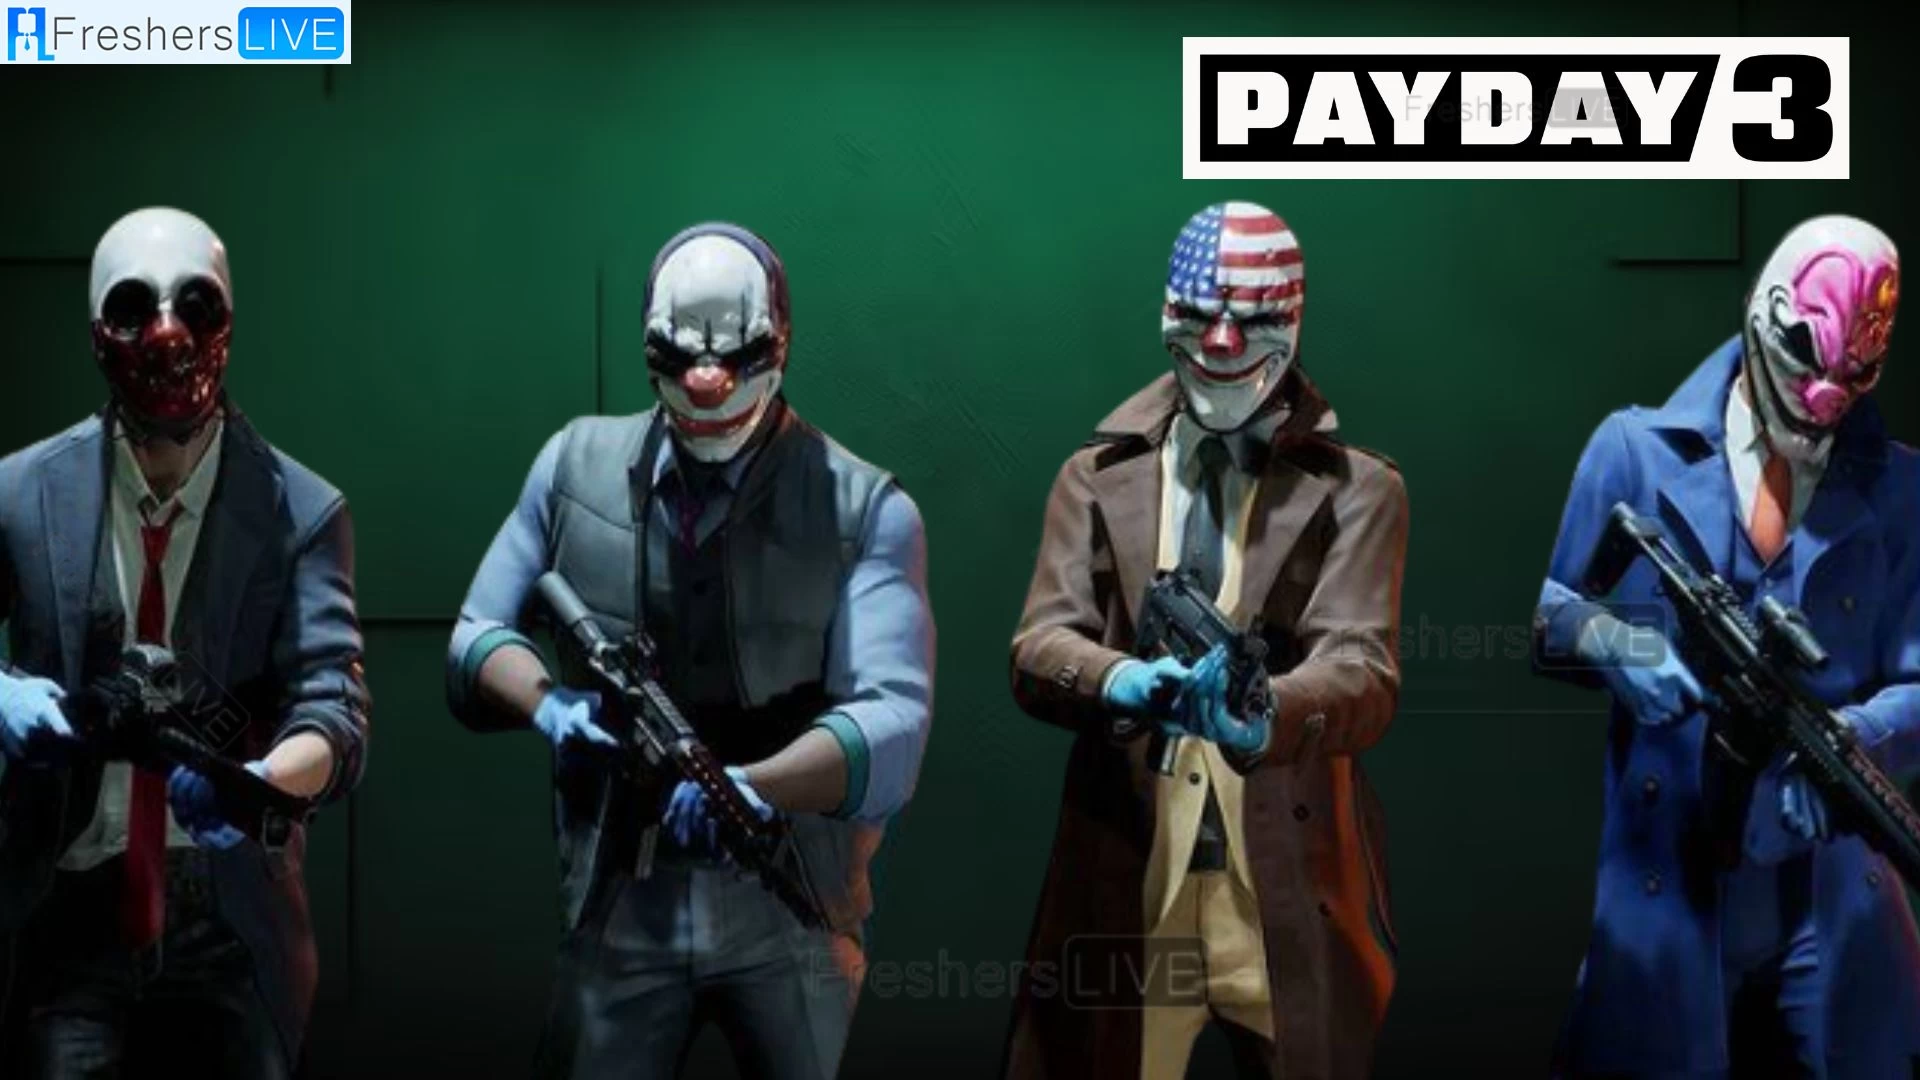 Payday 3 Preload Size And Steam Early Access Guide and More